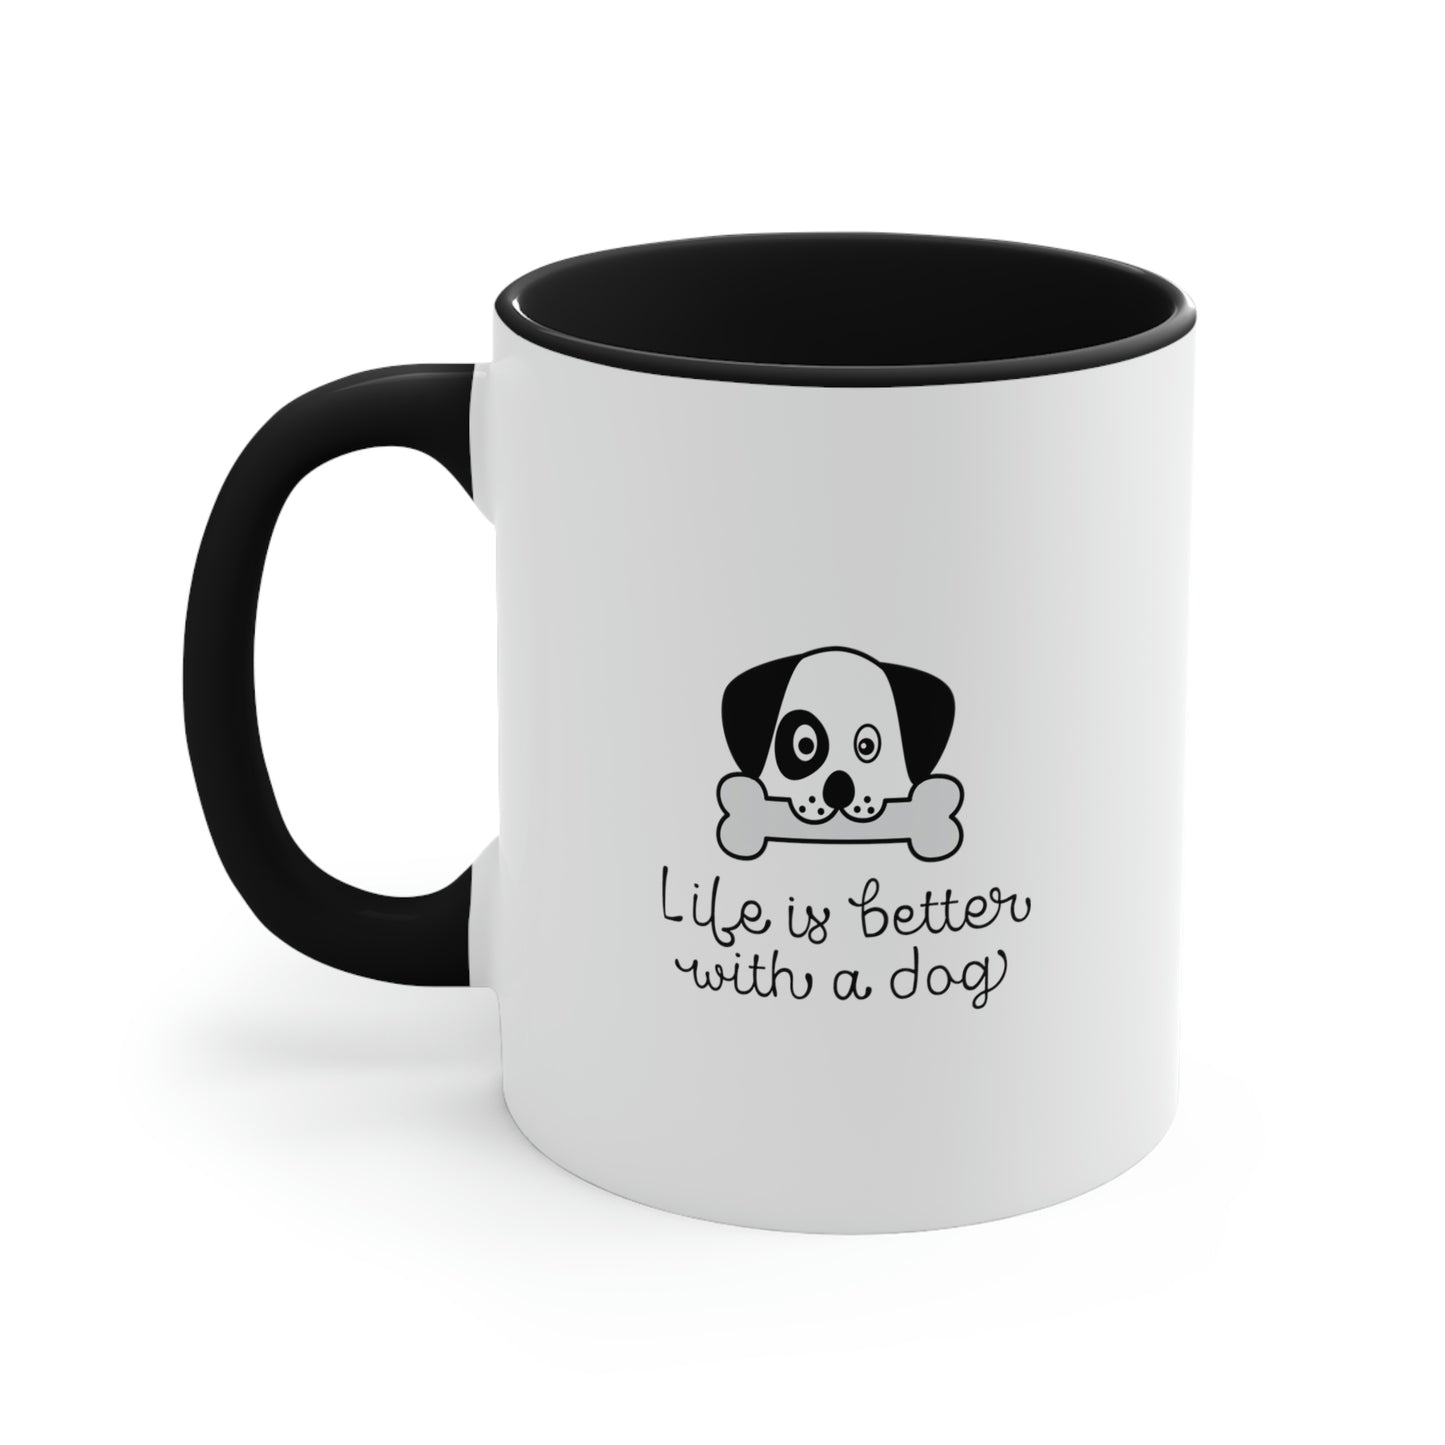 Life is better with a dog Black and White Coffee Mug, 11oz